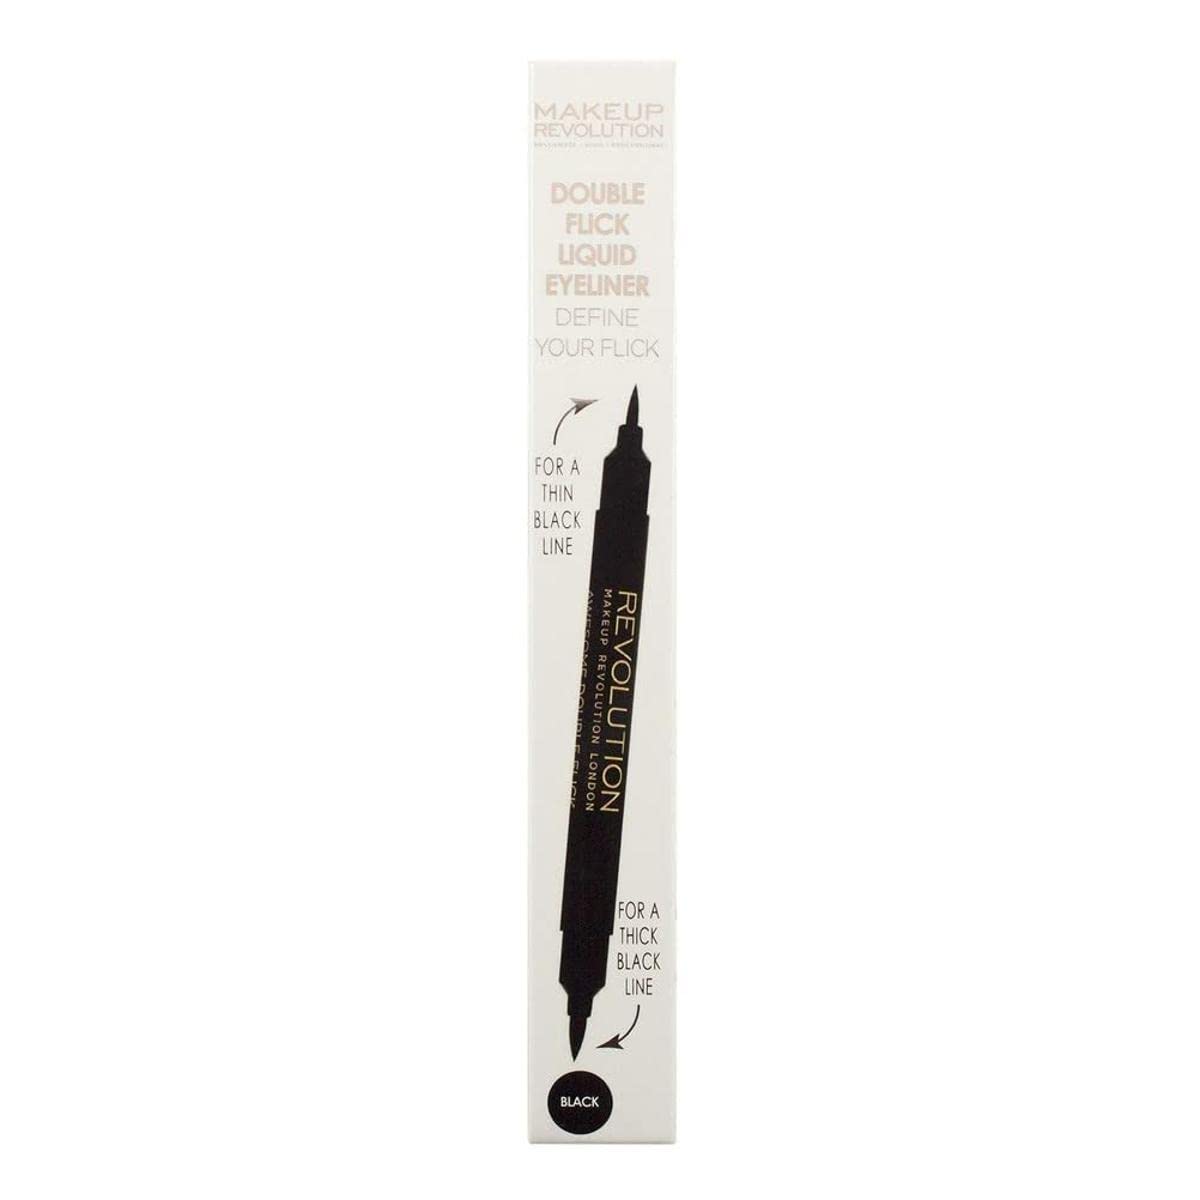 Revolution Thick & Thin Dual Liquid Eyeliner, Dual Ended Eyeliner Pen, Highly Pigmented & Last All Day Long, Cruelty-Free, 5g